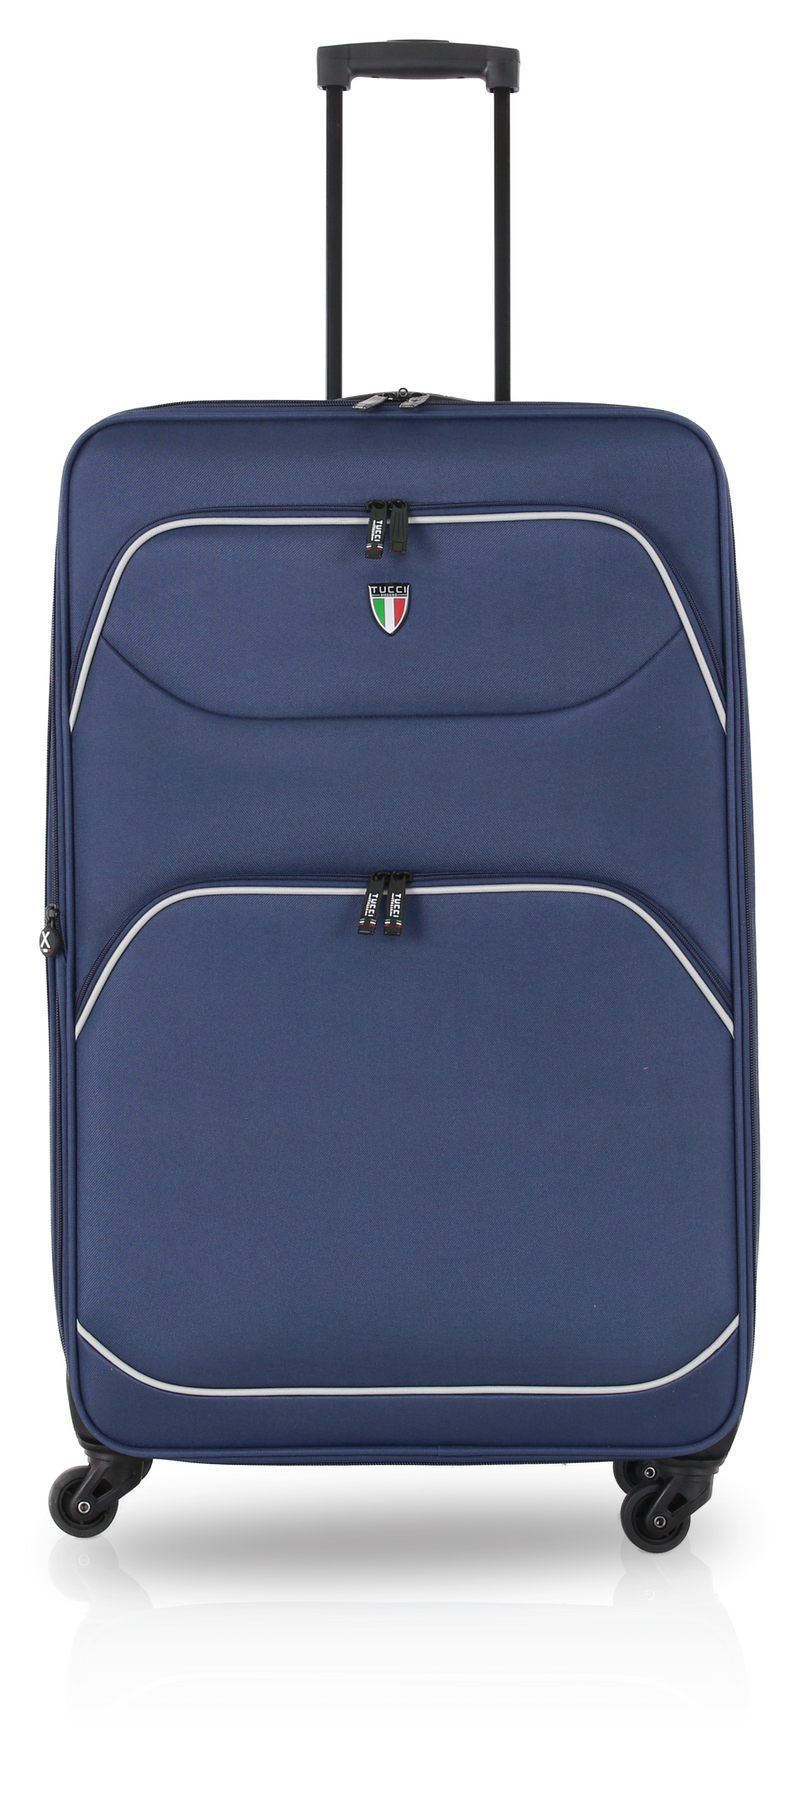 TUCCI Italy BEN FATTO FABRIC 28" Large Luggage Suitcase